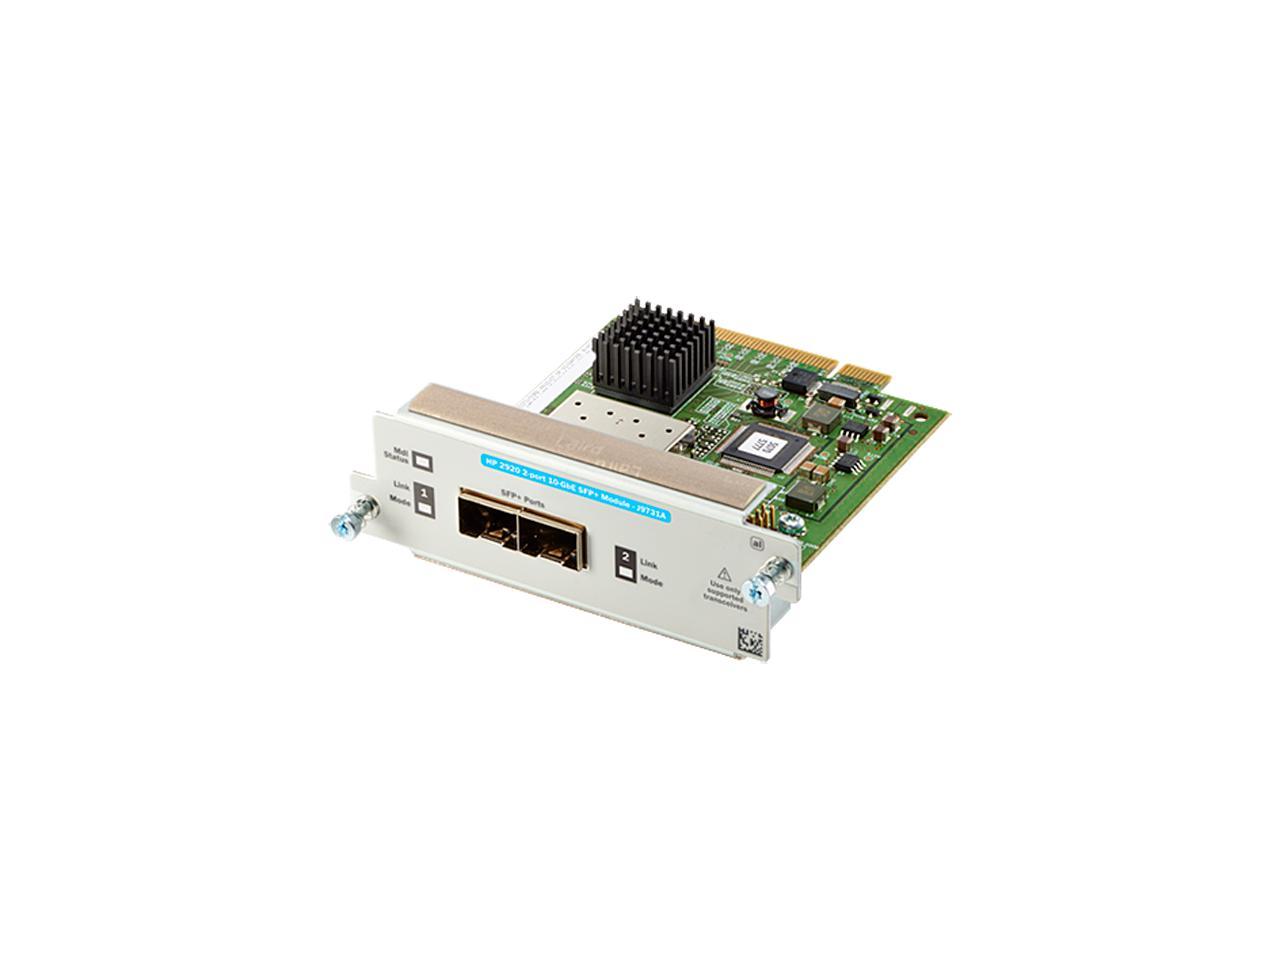 HPE - 2920 2-port 10GbE SFP+ Expansion Module - J9731A 699.99